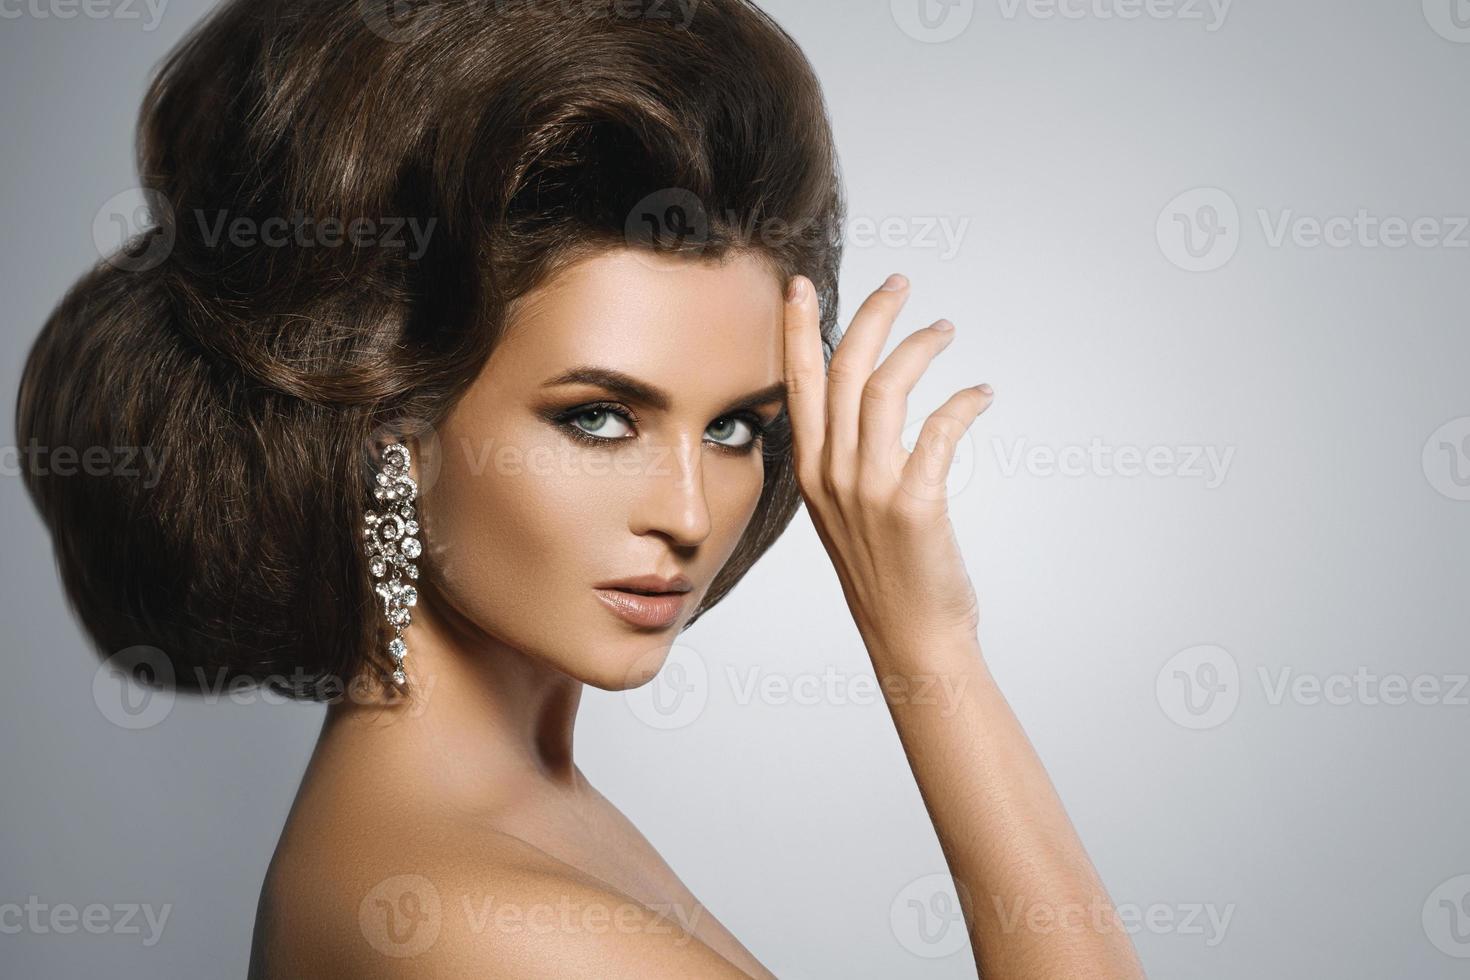 Gorgeous woman with a beautiful hairstyle and make-up photo